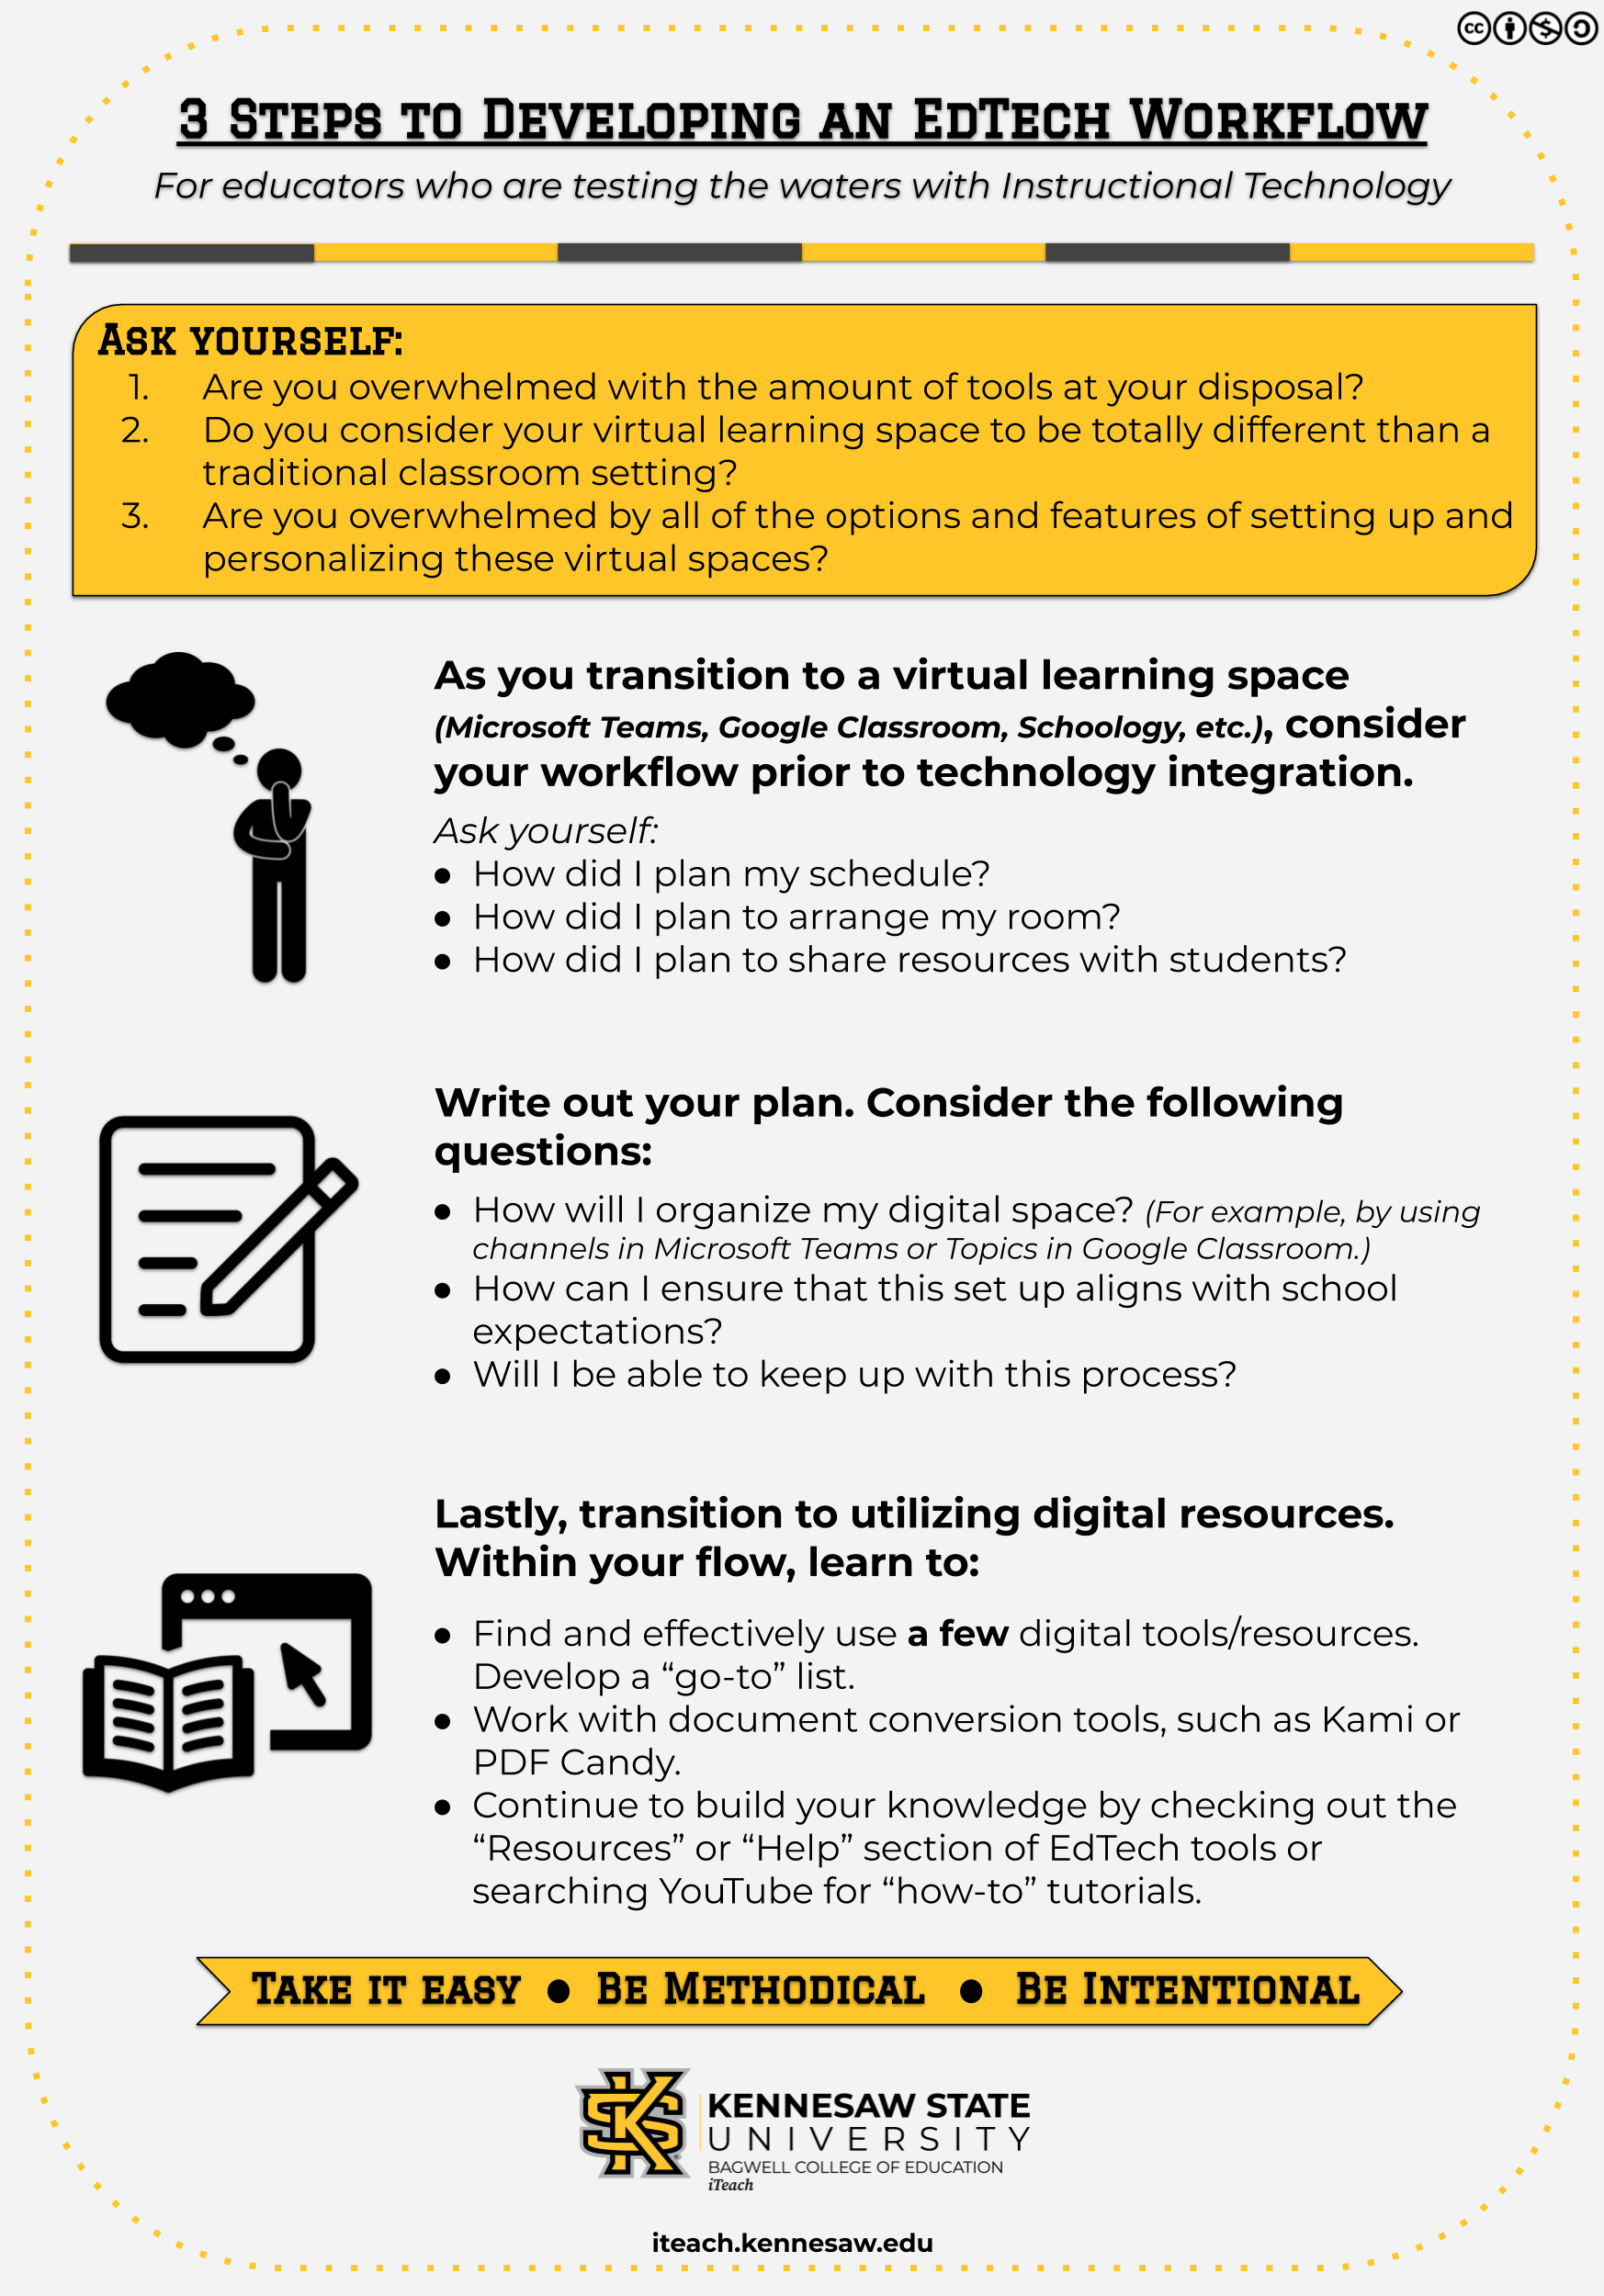 Borders_3 Steps to Developing an EdTech Workflow.png